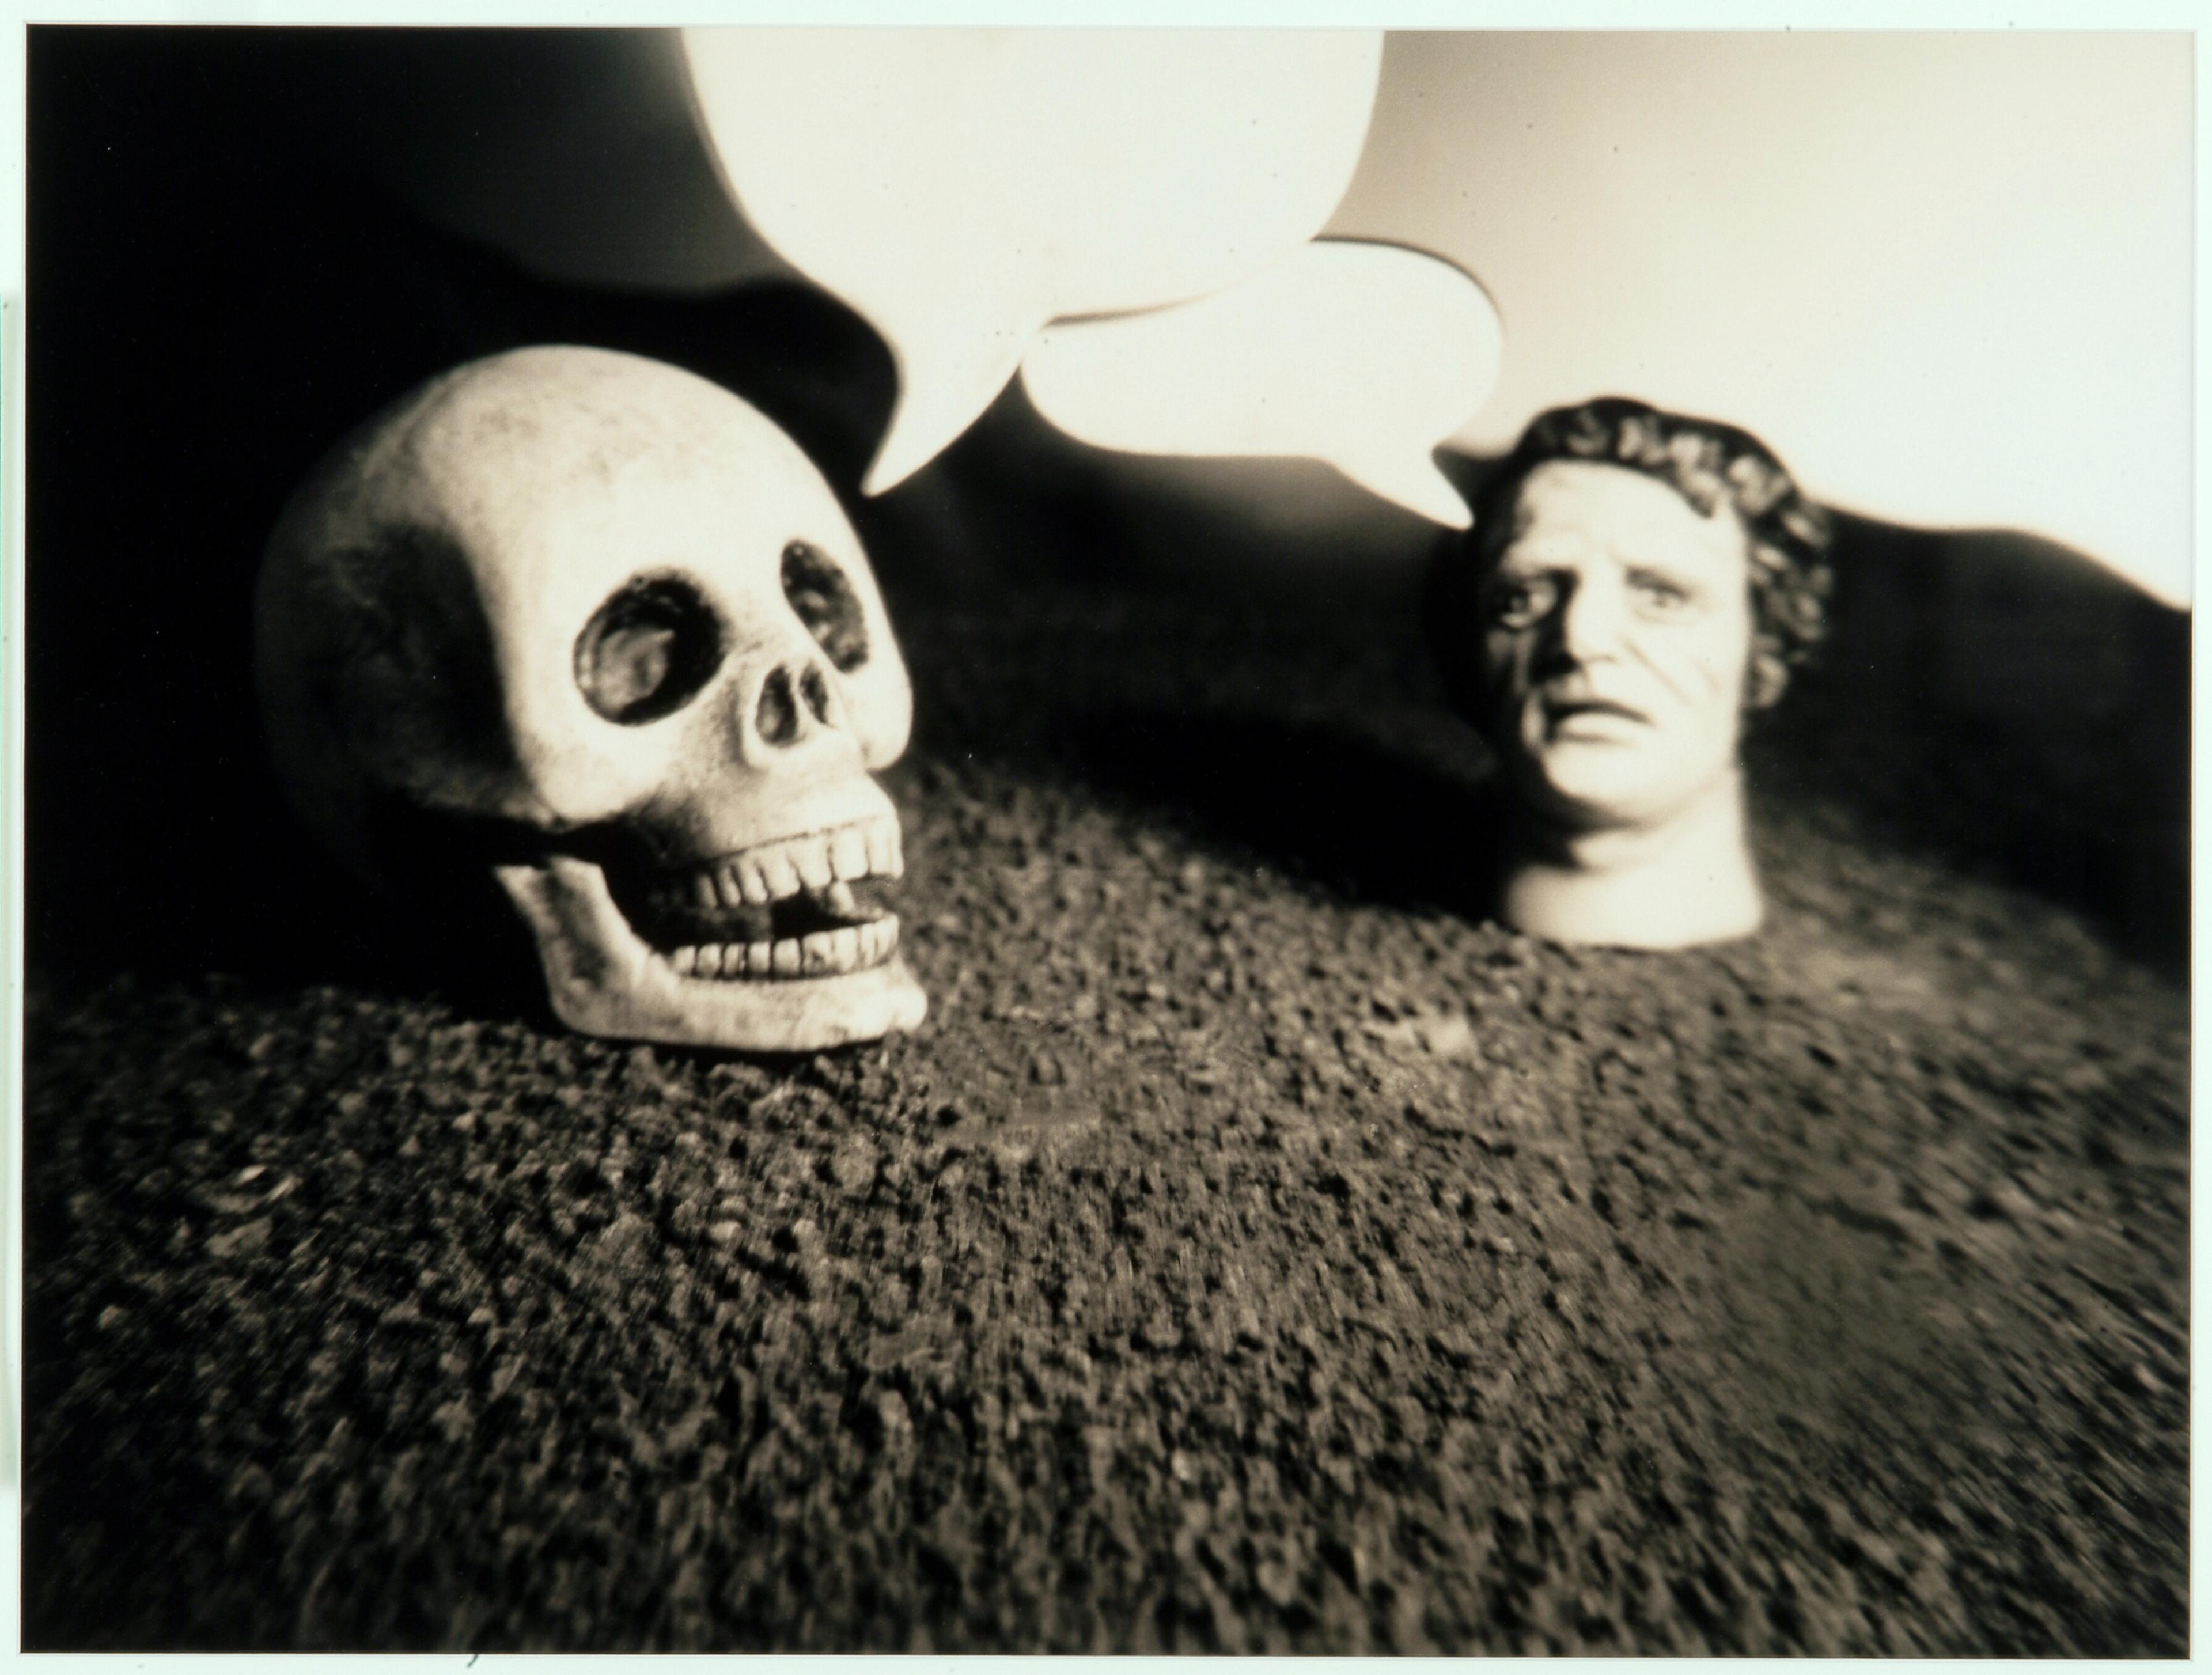 Ronnie VAN HOUT, In the Valley of Dry Bones, 1993, Sepia-toned photograph, skull, head, speech bubbles